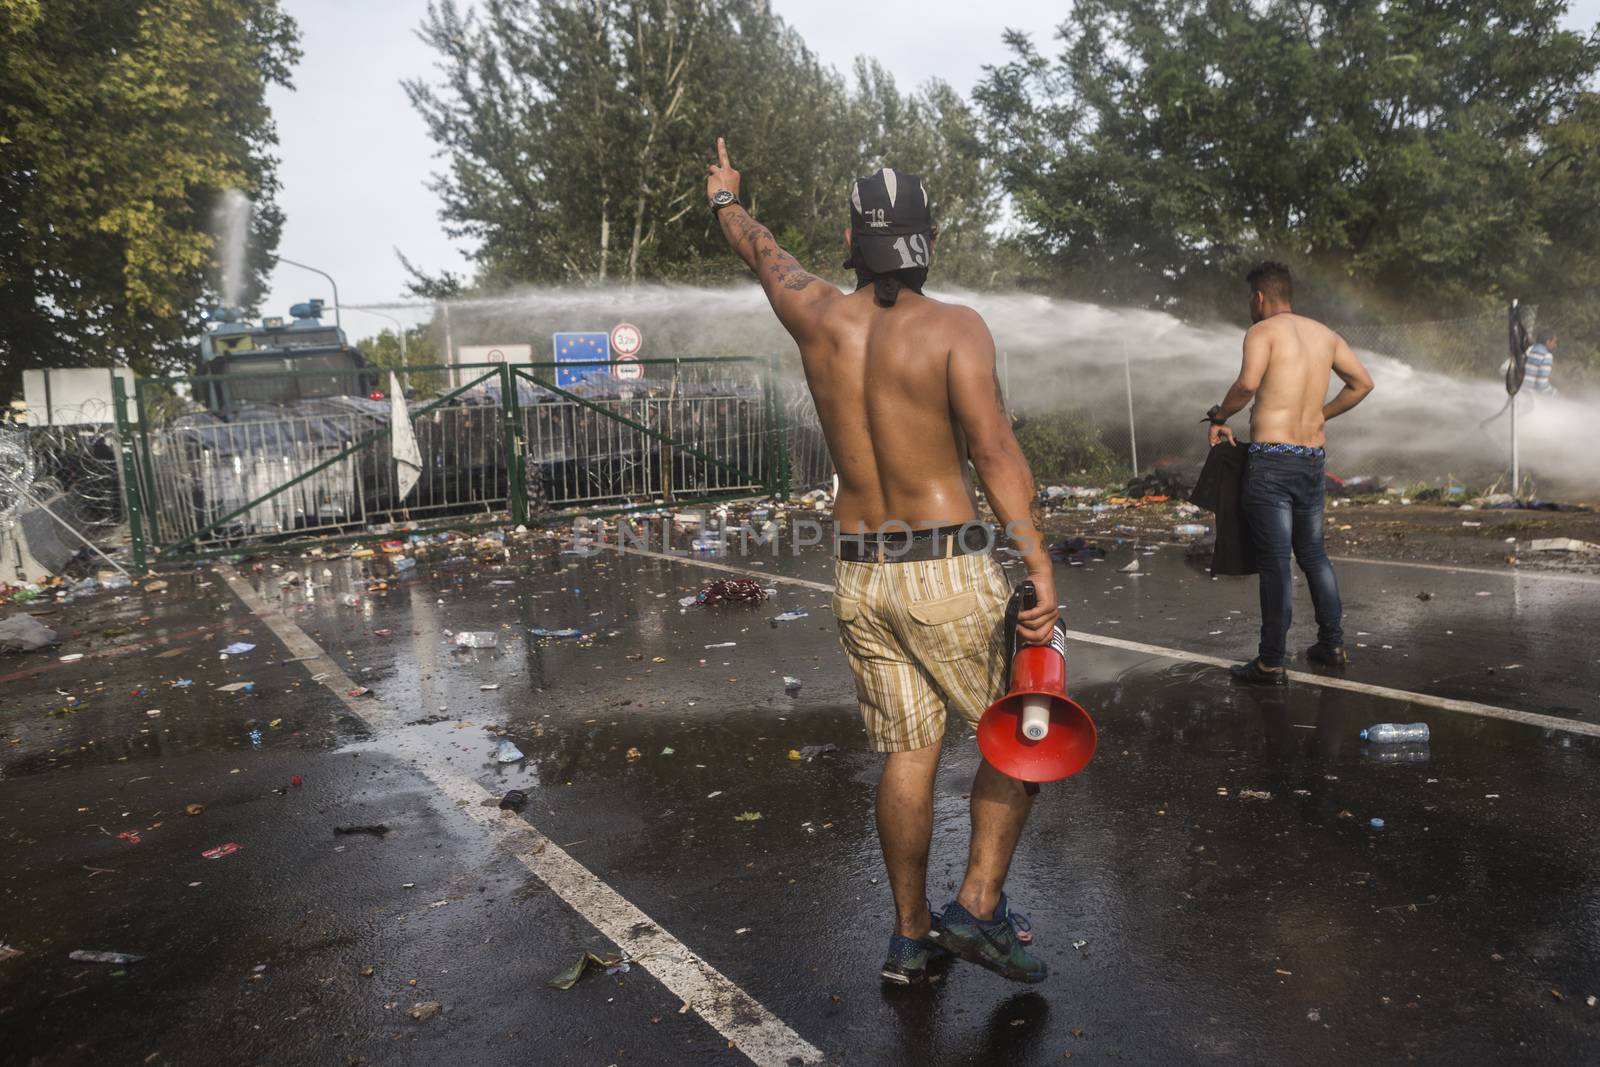 SERBIA, Horgos: Hungarian police fire tear gas and water cannons into the refugees in the Serbian border town of Horgos on September 16, 2015, after Hungary closed its border in an effort to stem the wave of refugees entering the country. ****Restriction: No Russia or Asia sales****